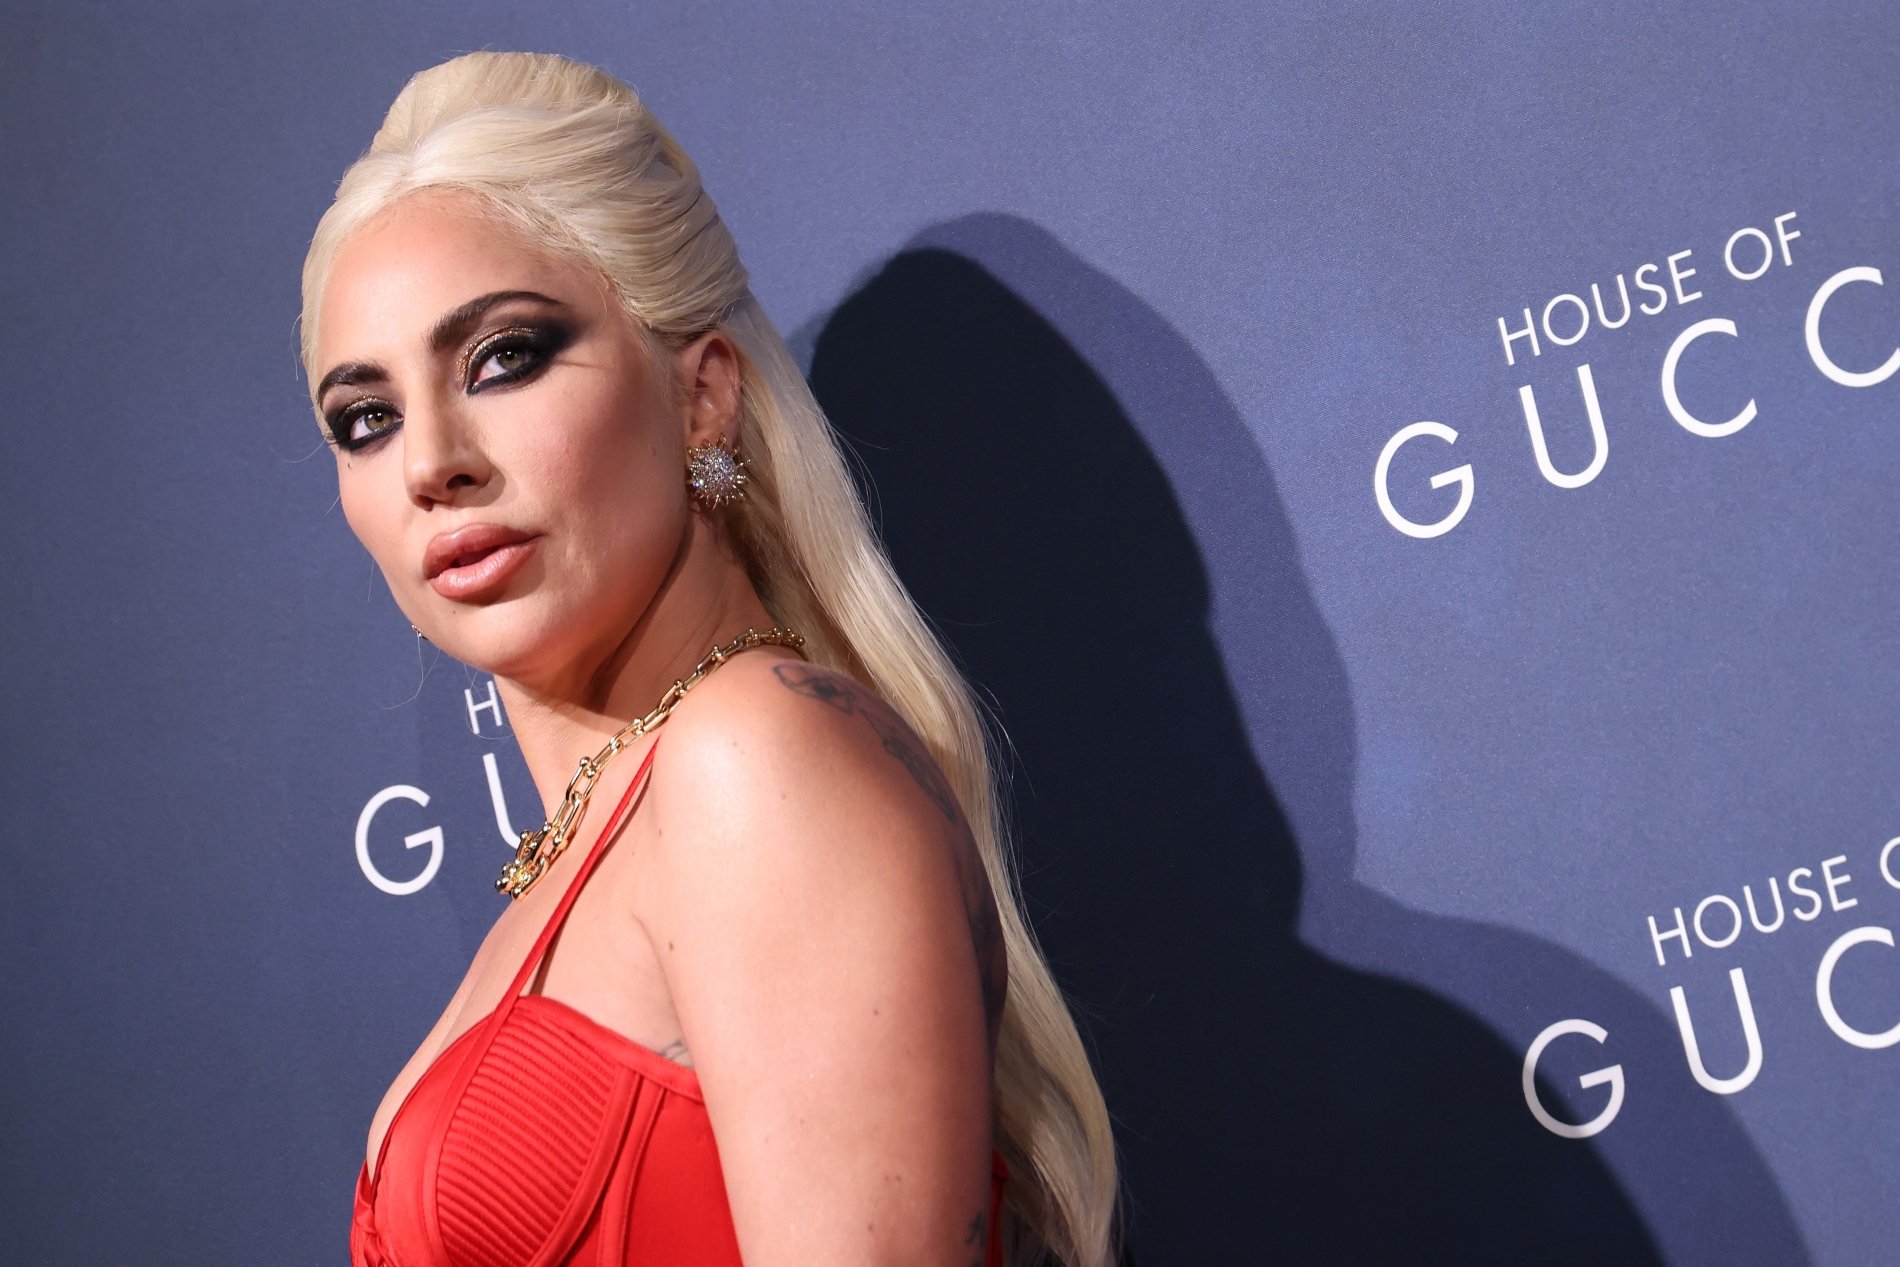 Lady Gaga attends premiere of 'House of Gucci' in Milan, Italy